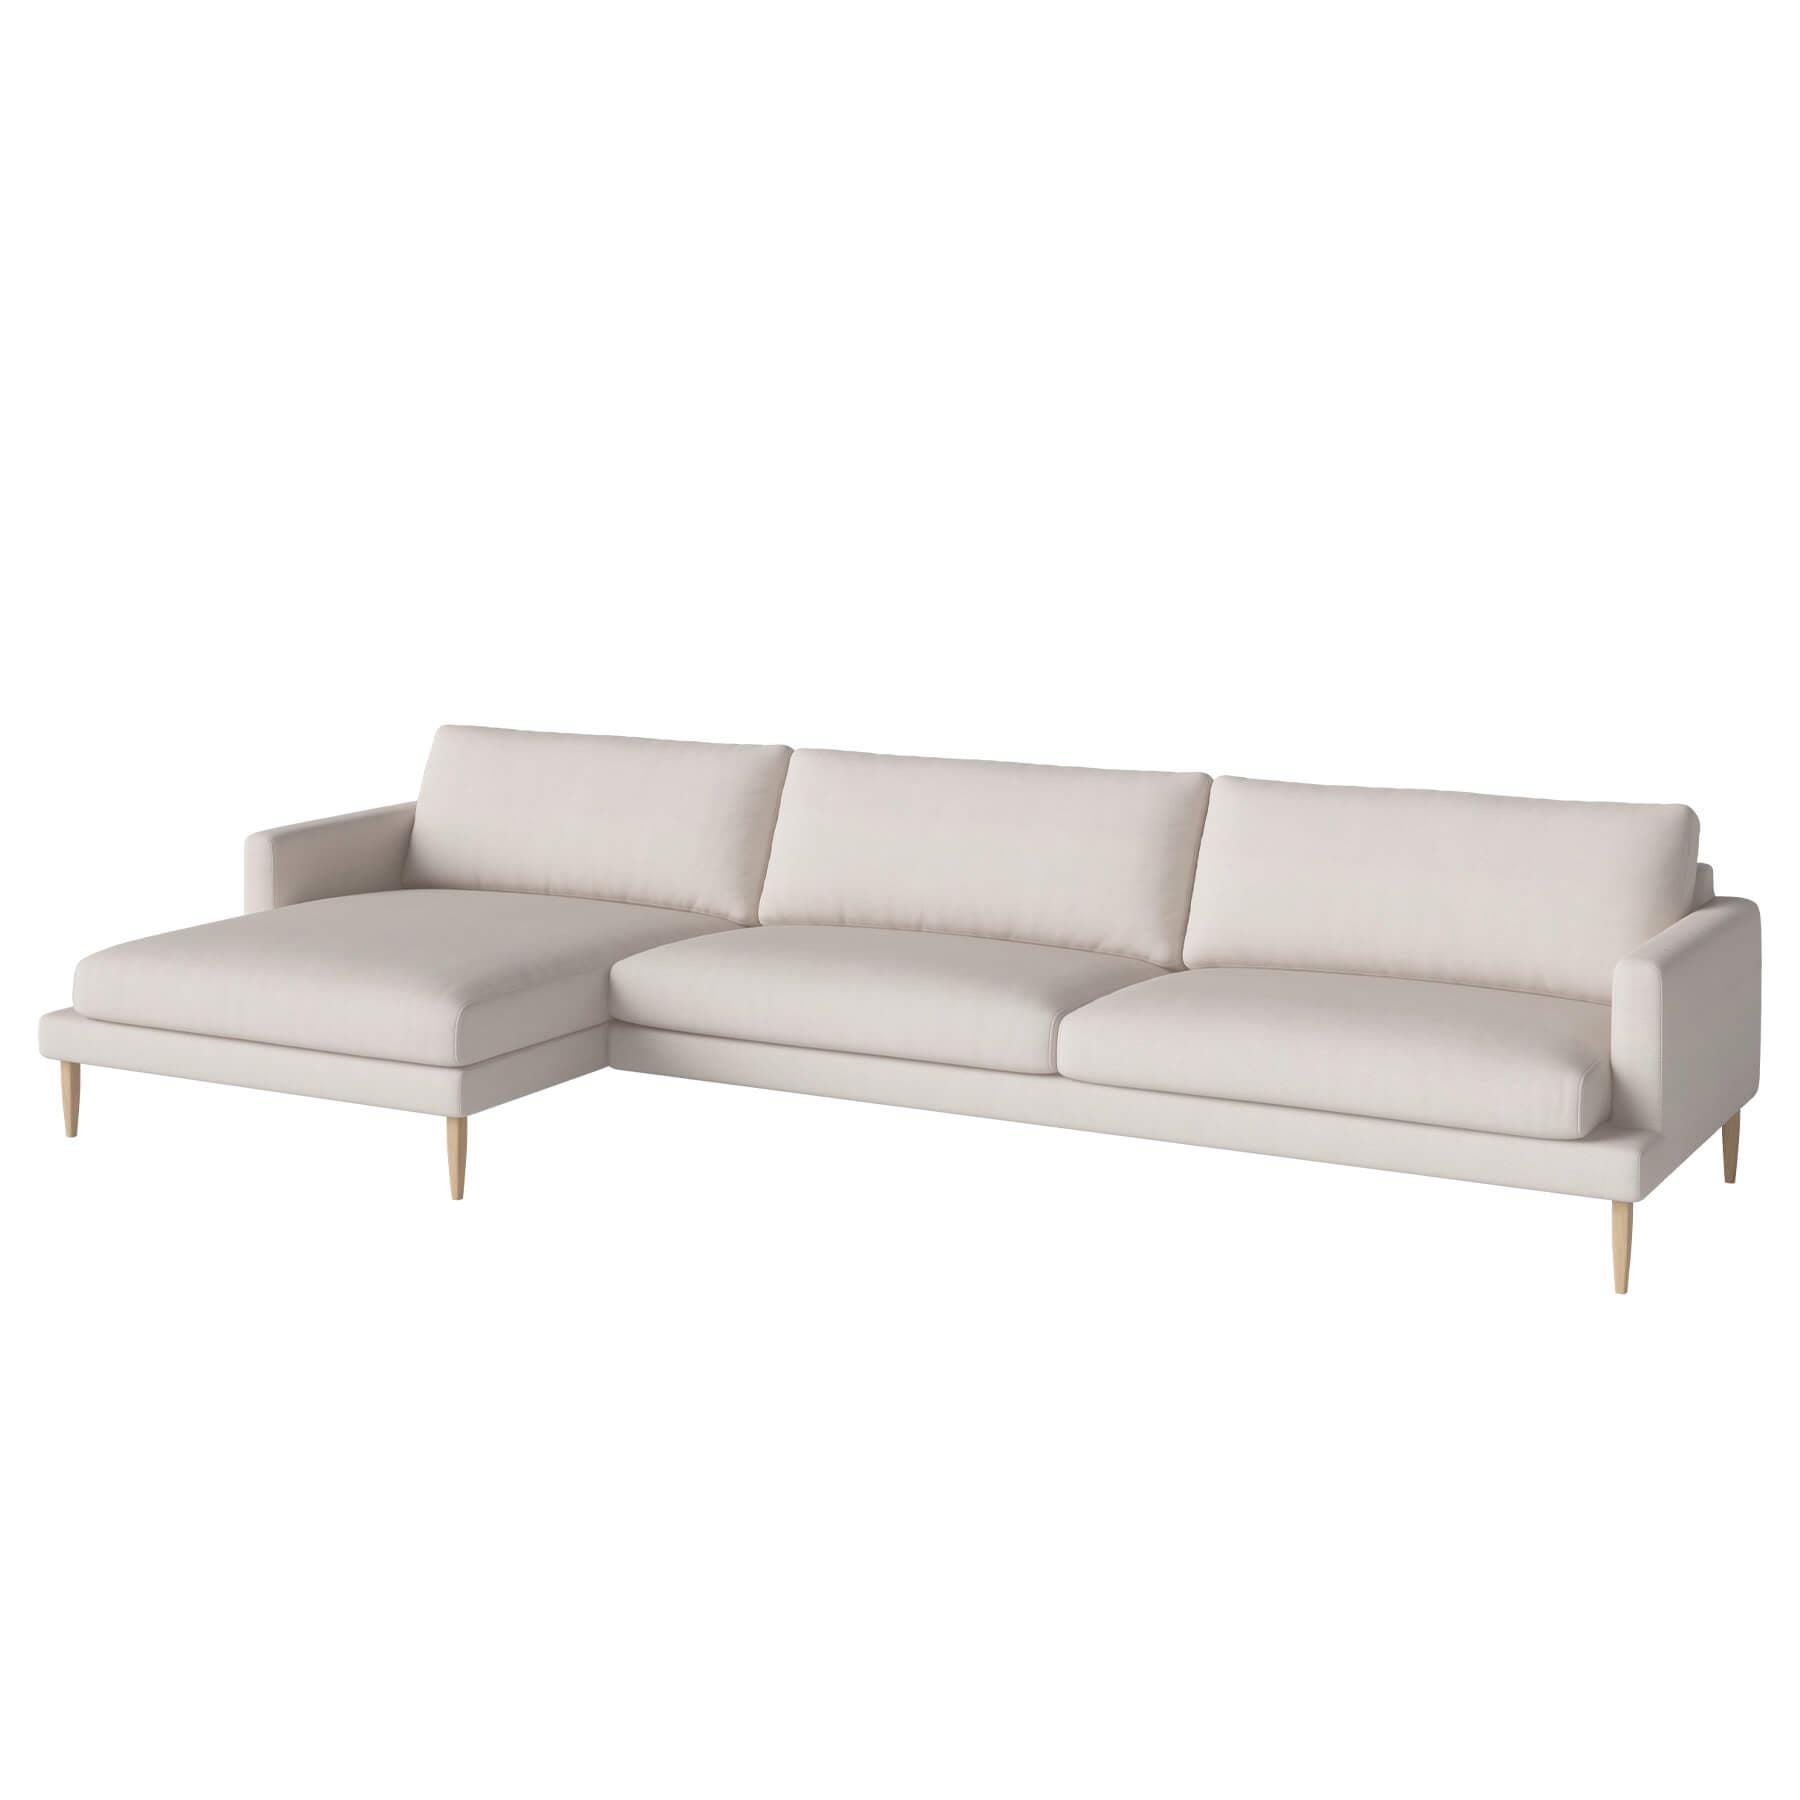 Bolia Veneda Sofa 45 Seater Sofa With Chaise Longue White Oiled Oak Linea Beige Left Brown Designer Furniture From Holloways Of Ludlow